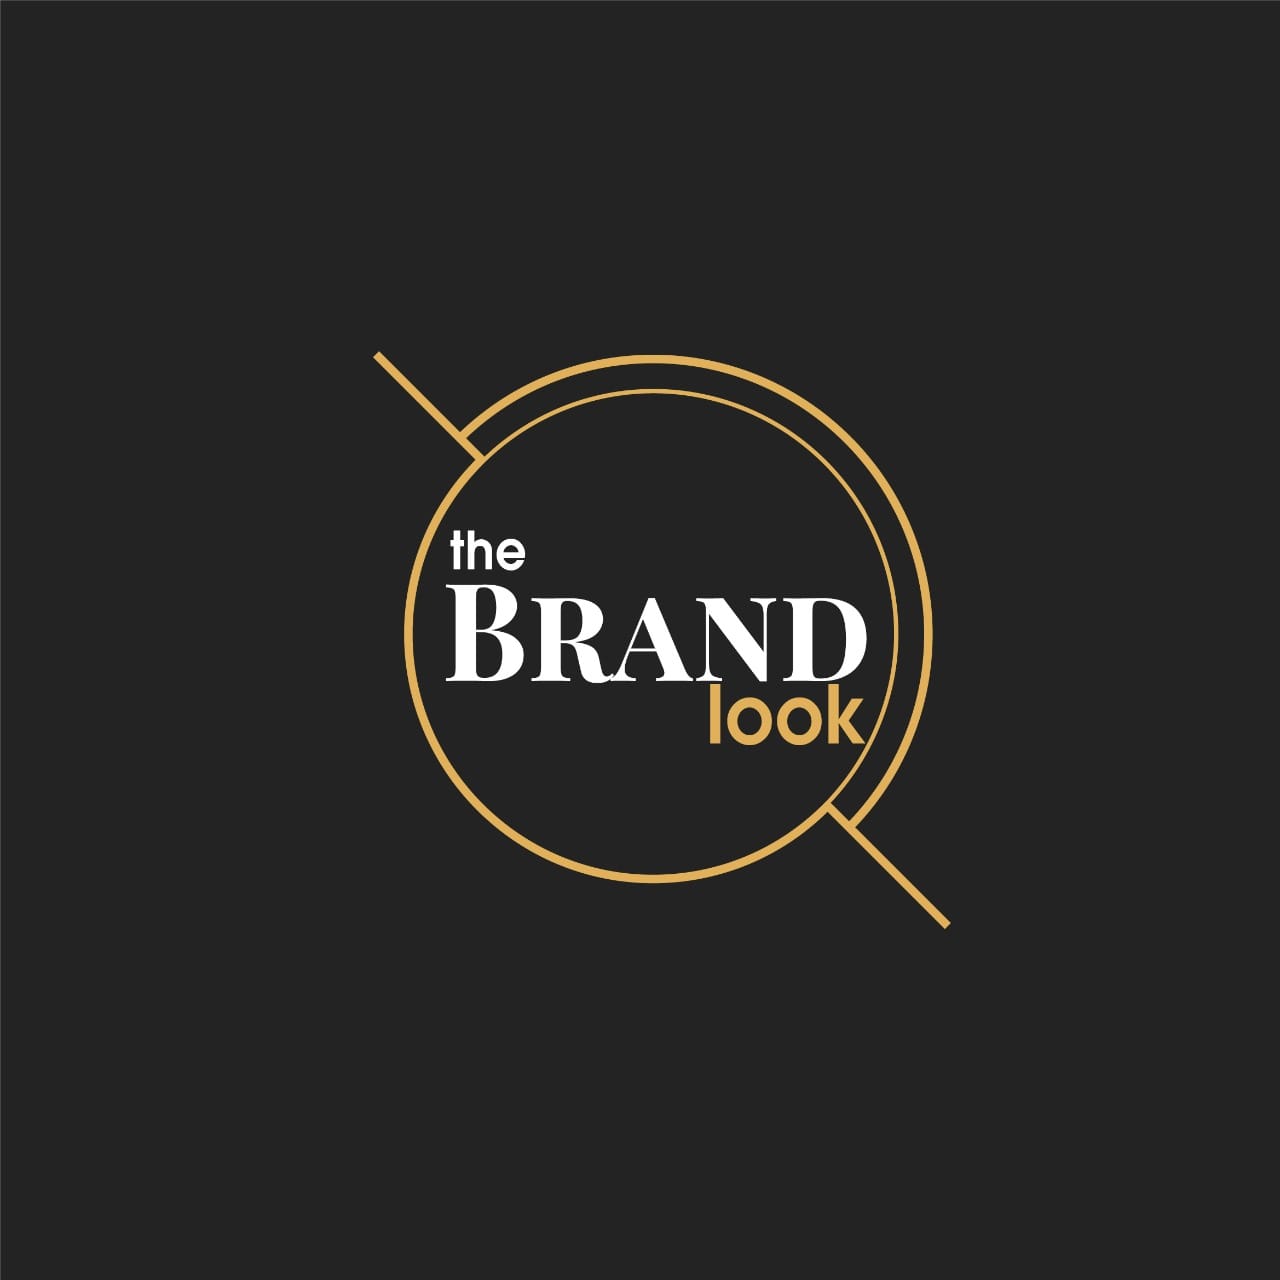 The Brand Look